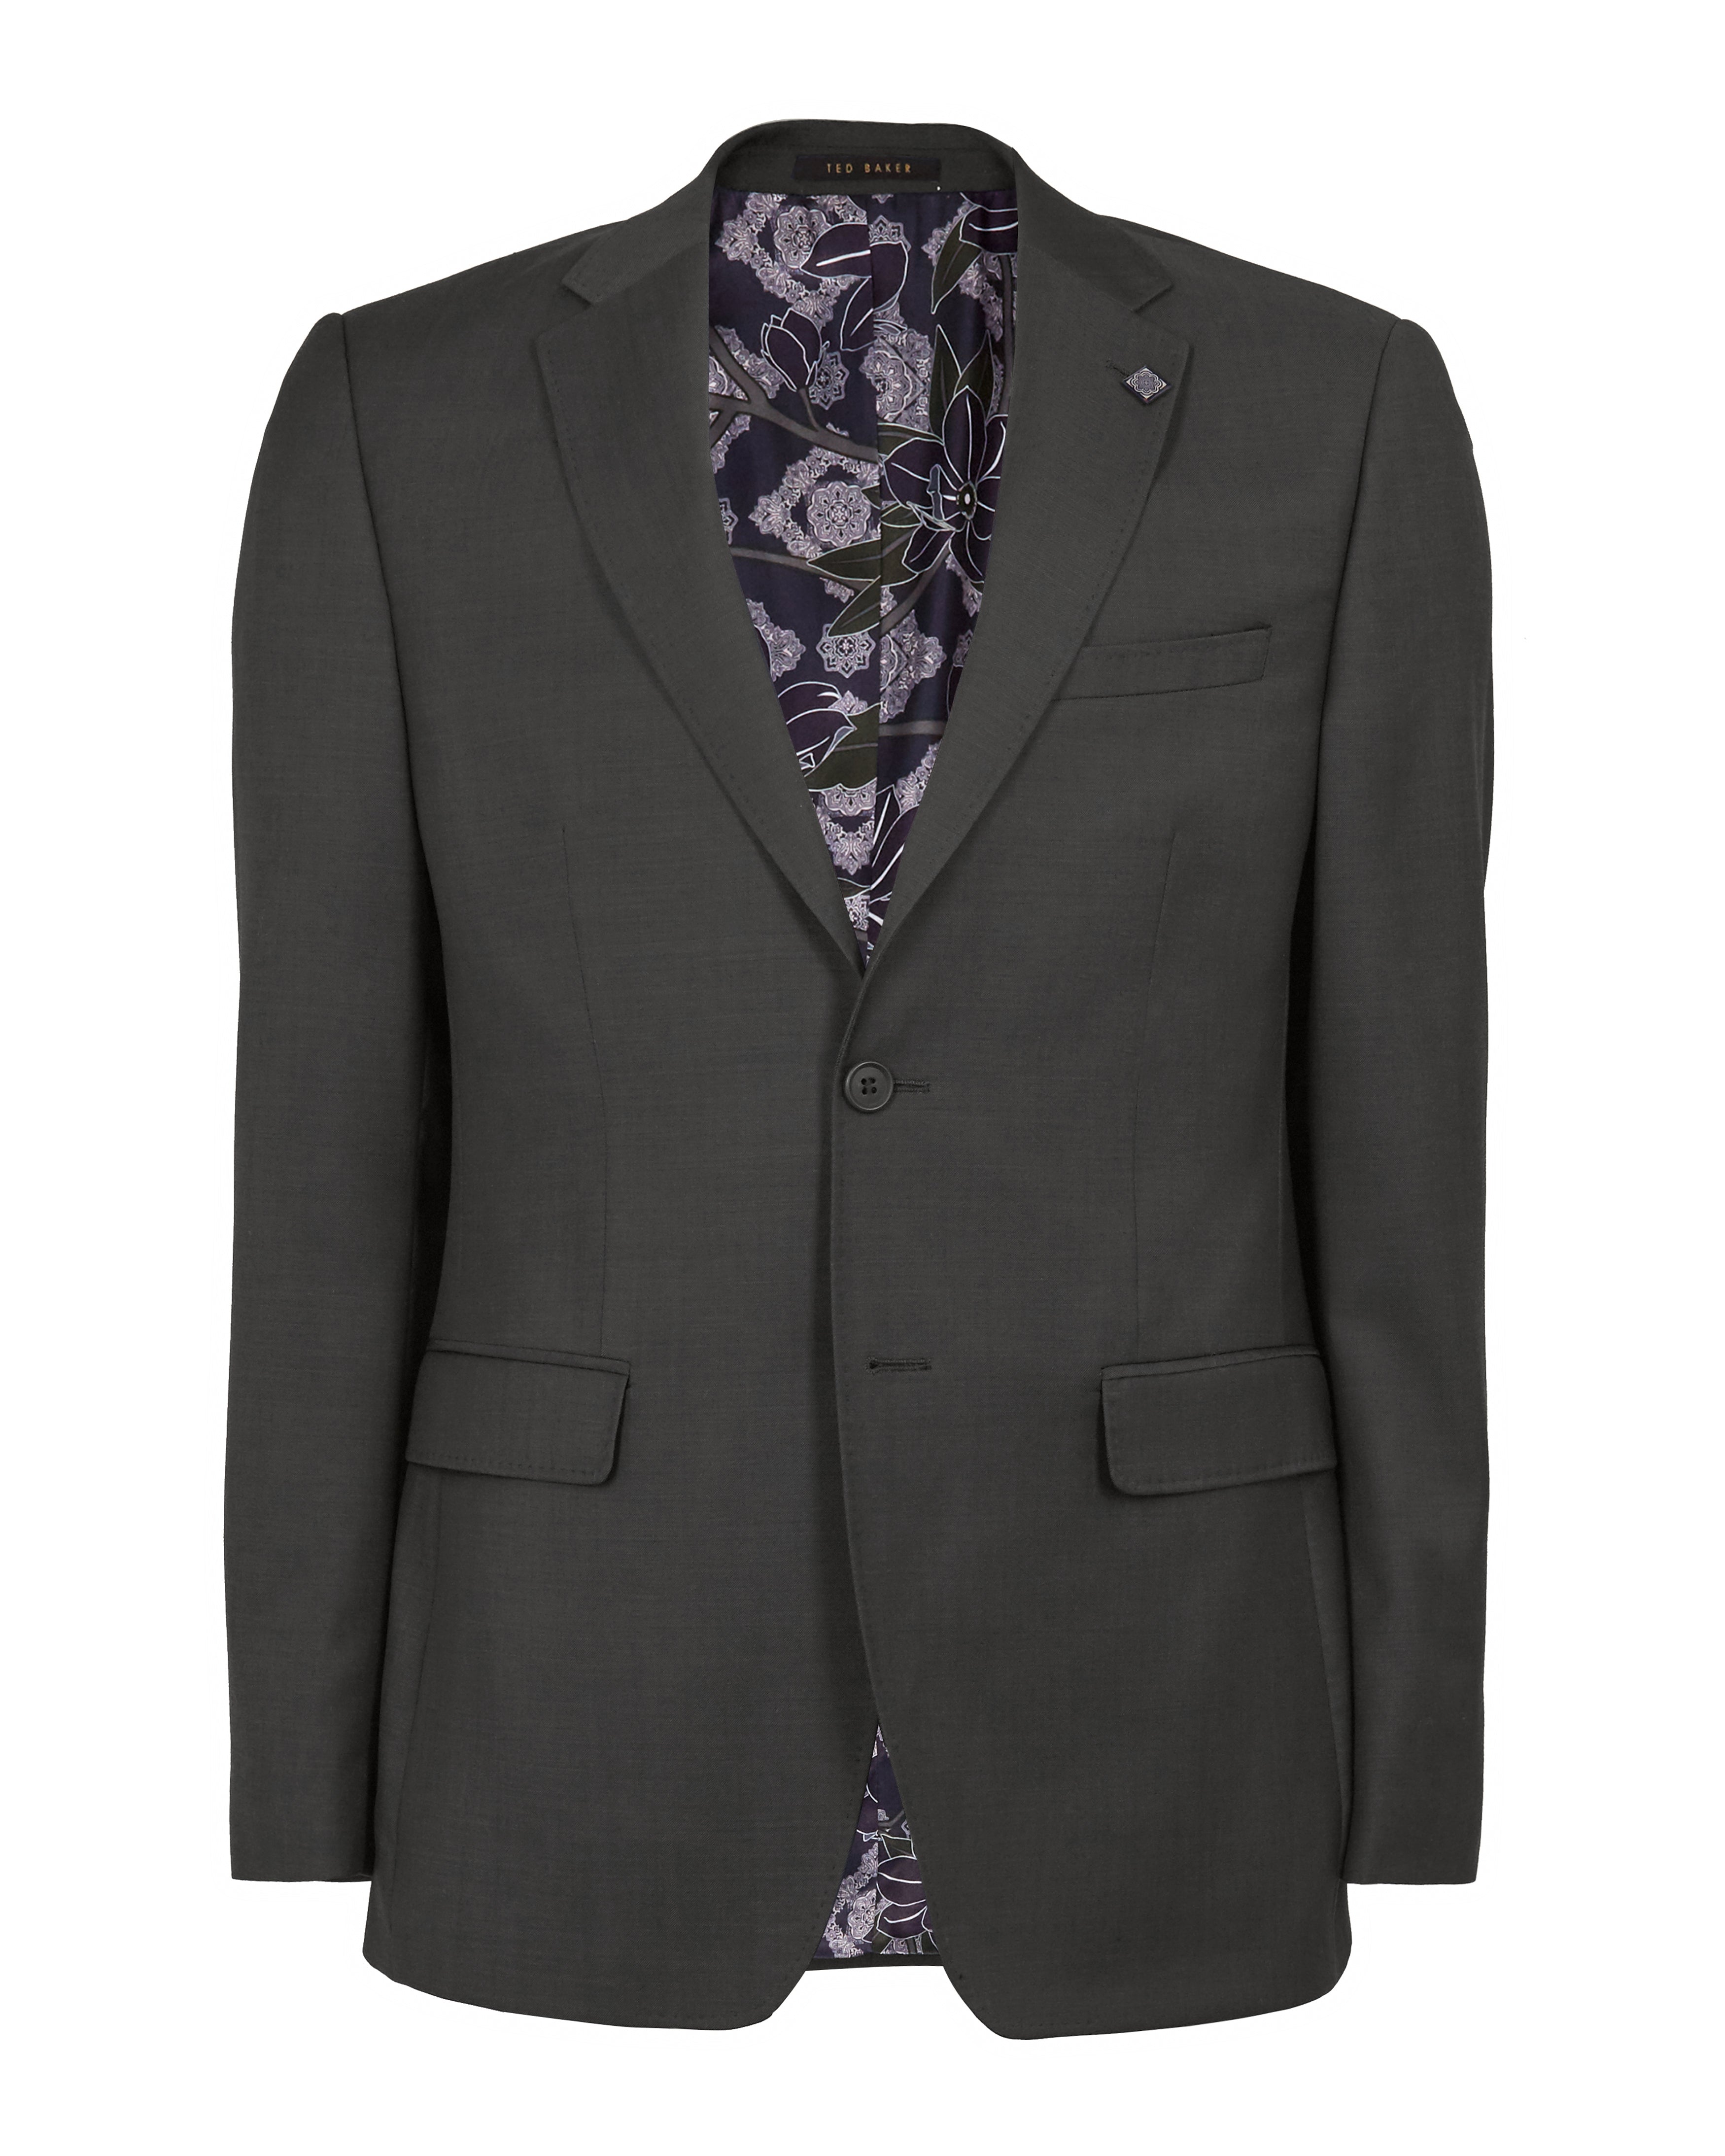 Ted Baker 'Elegan' Notch Lapel Prince of Wales Check Wool Suit Jacket - Charcoal